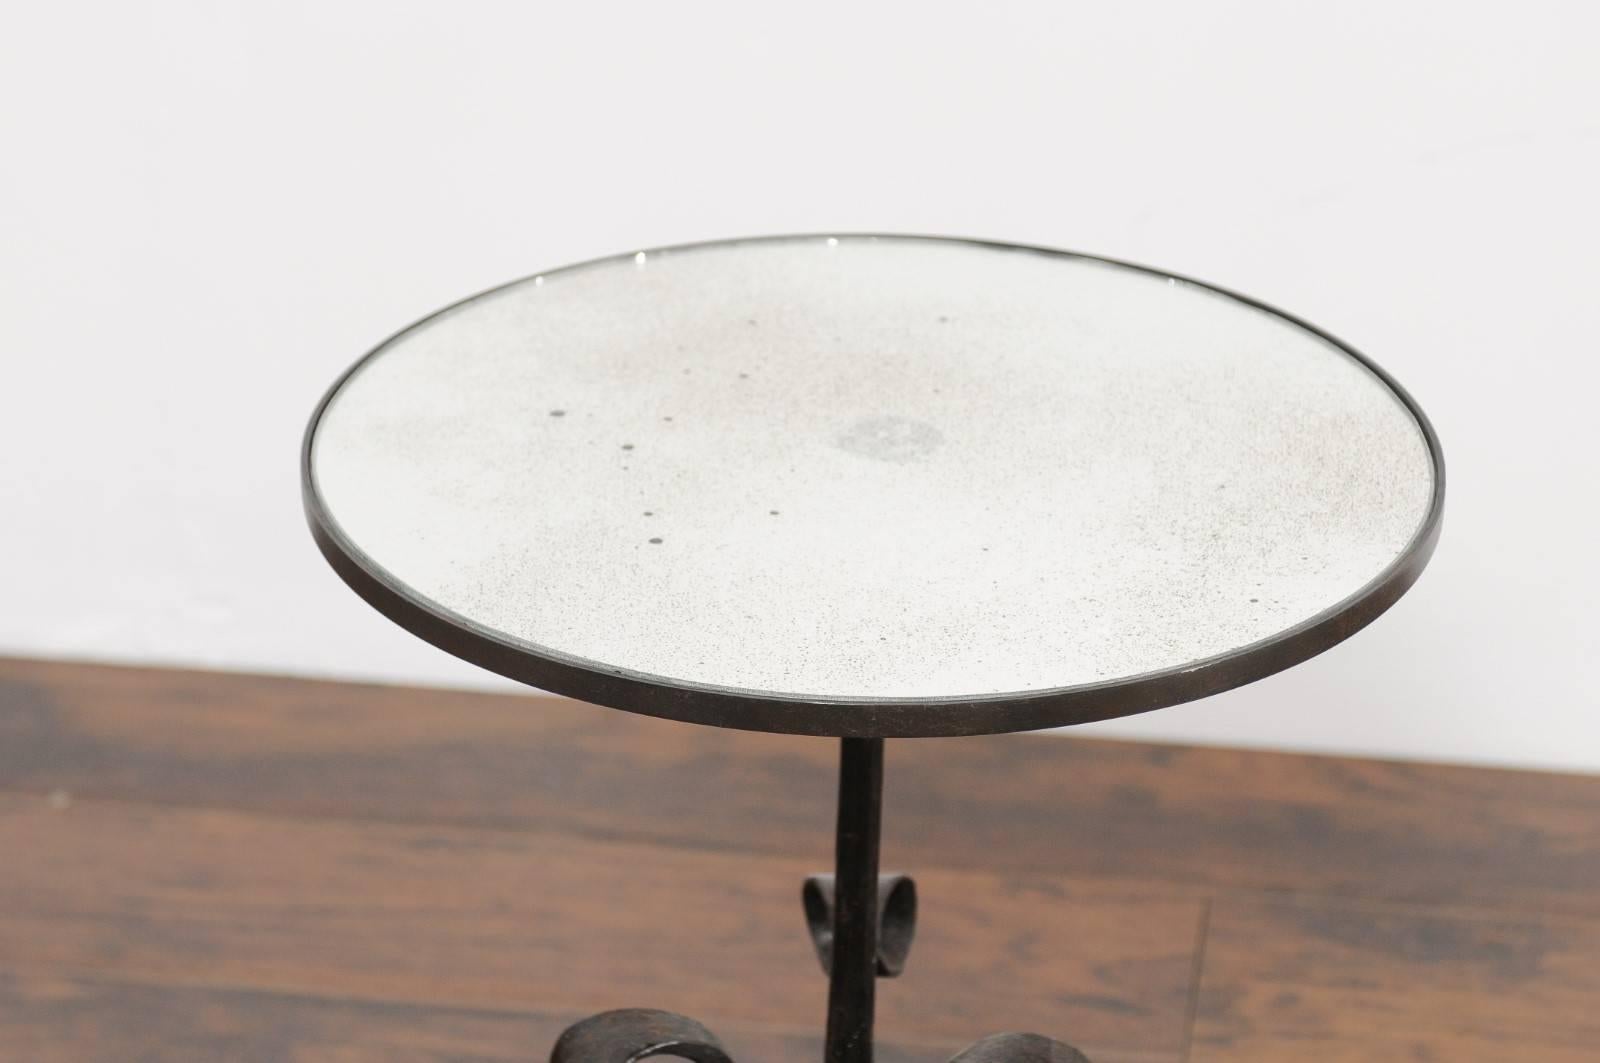 19th Century 1870s Italian Wrought-Iron Pedestal Side Table with Mirrored Top and Scrolls